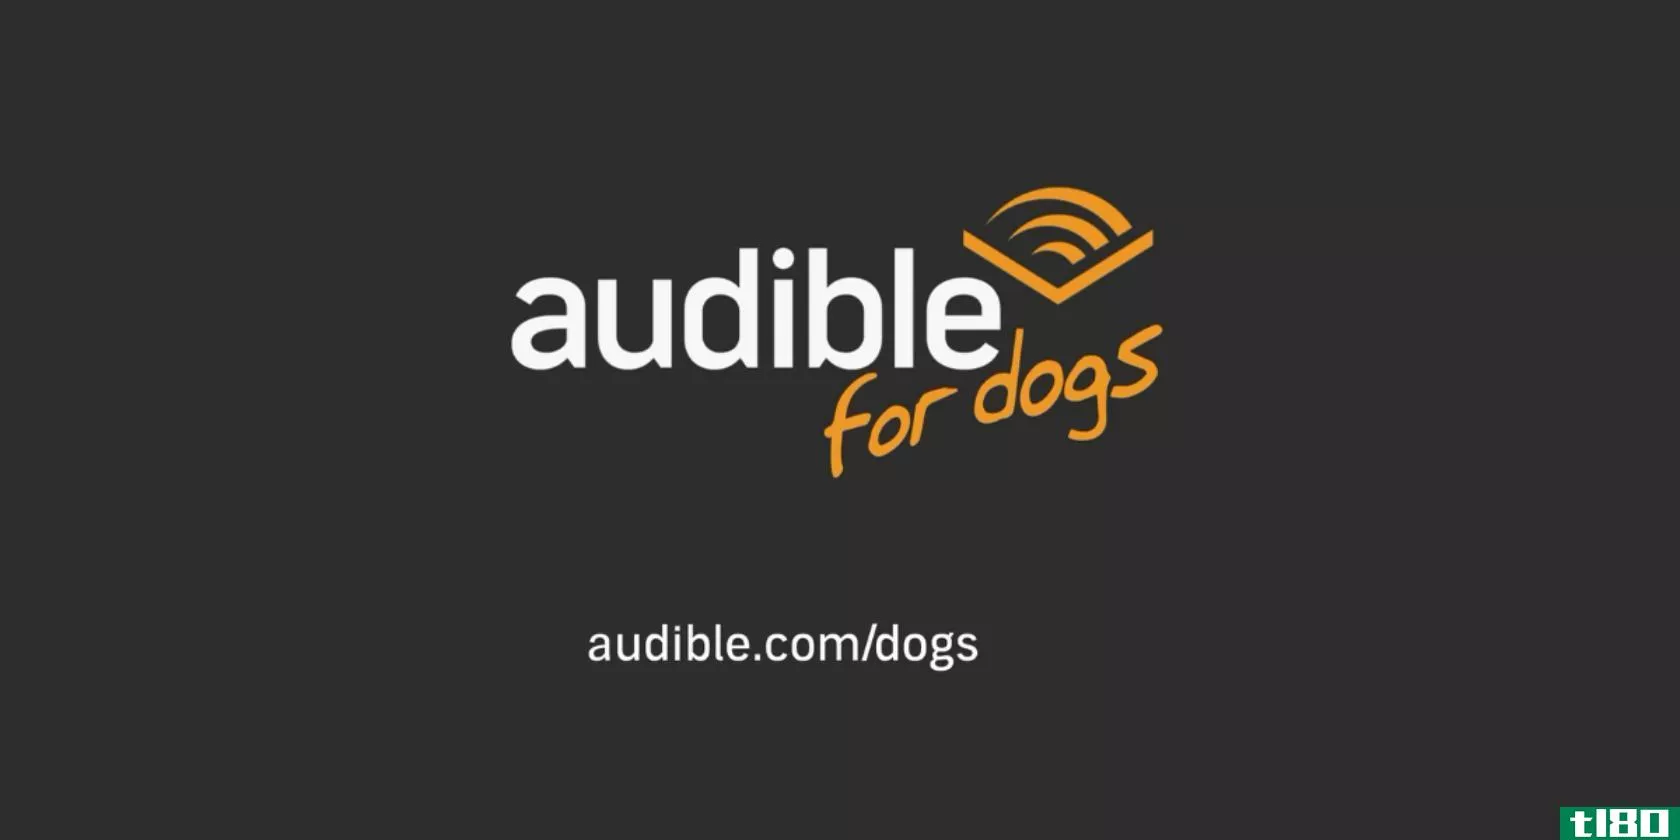 audible-for-dogs-logo